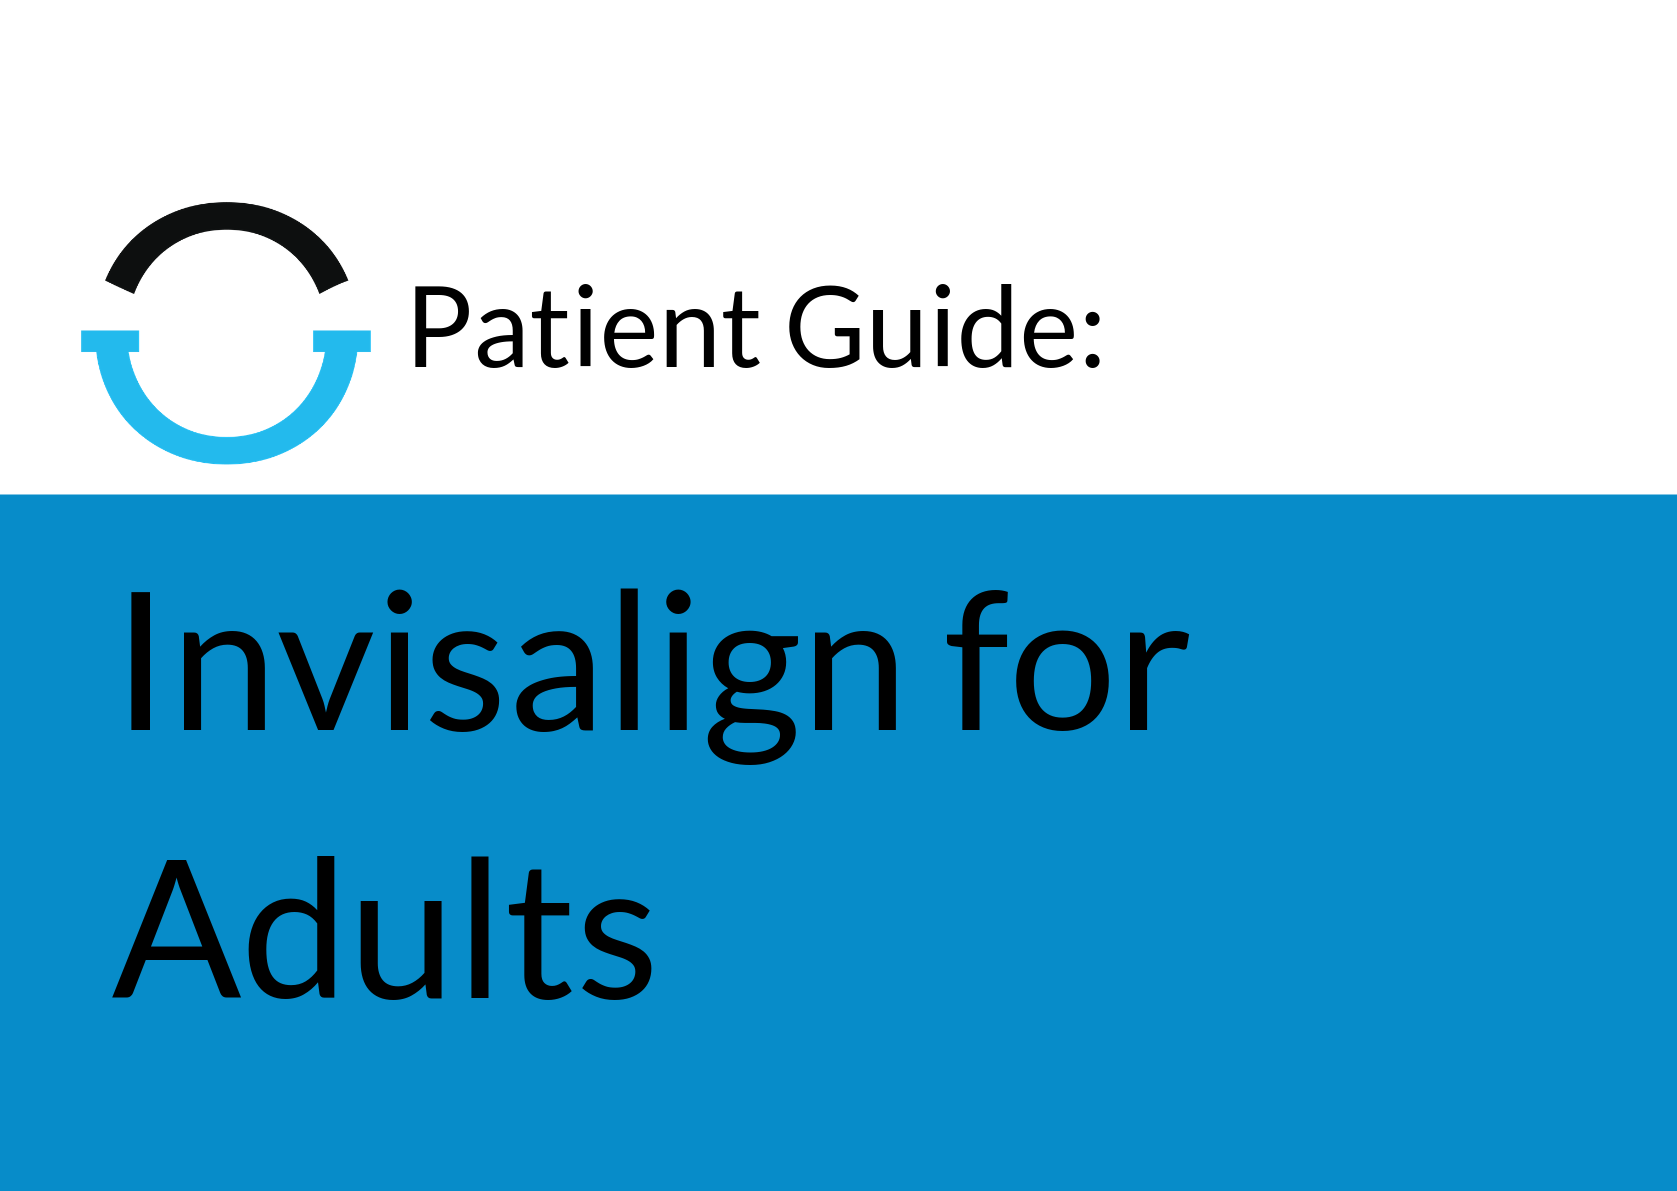 Patient Guide Header Image – Invisalign for Children Adults LARGE